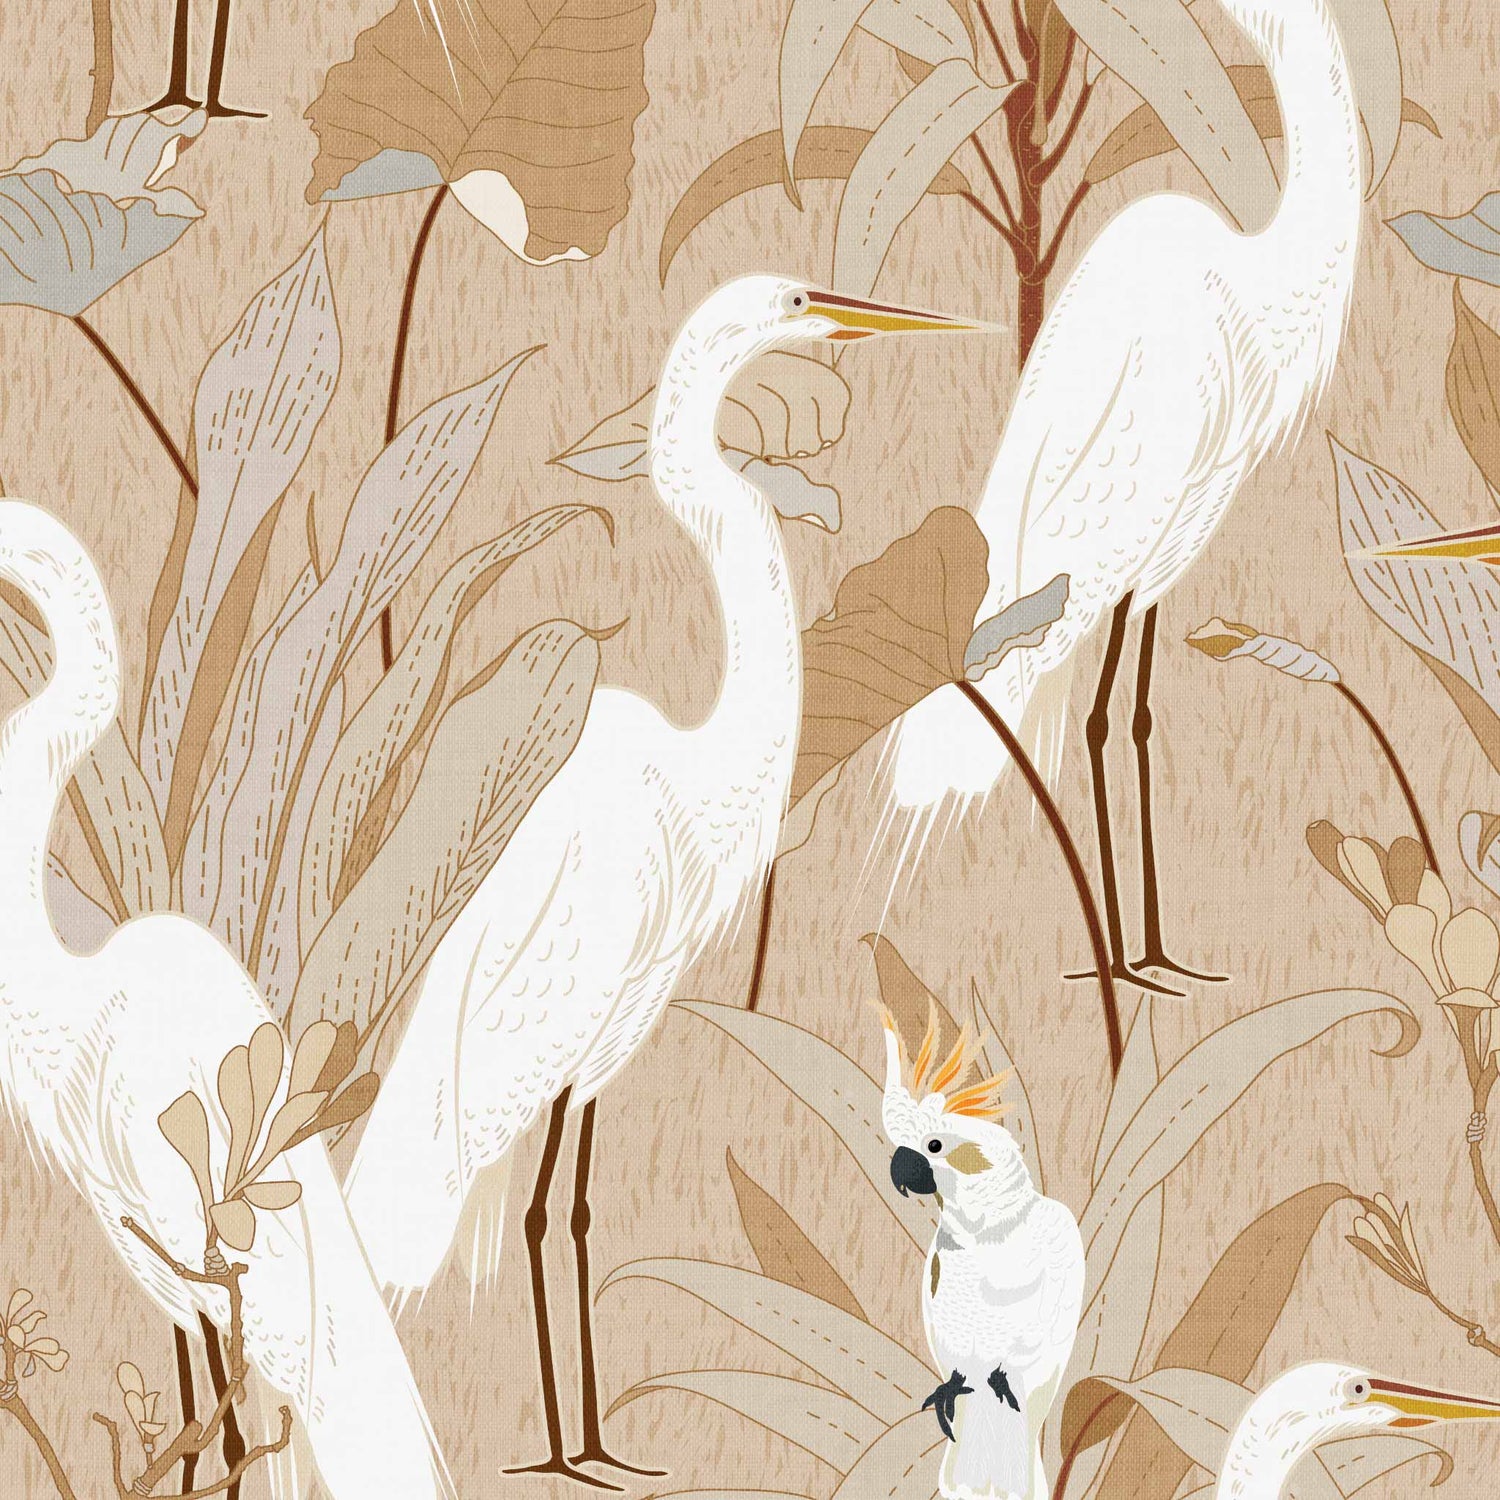 Designed with an eye-catching flair of animals and class, Cranes and Cockatoo Wallpaper - Tan encaptures tasteful luxury. This exclusive wallpaper features a sophisticated design of cranes and cockatoos, perfect for bringing a sense of refinement and elegance to your home.